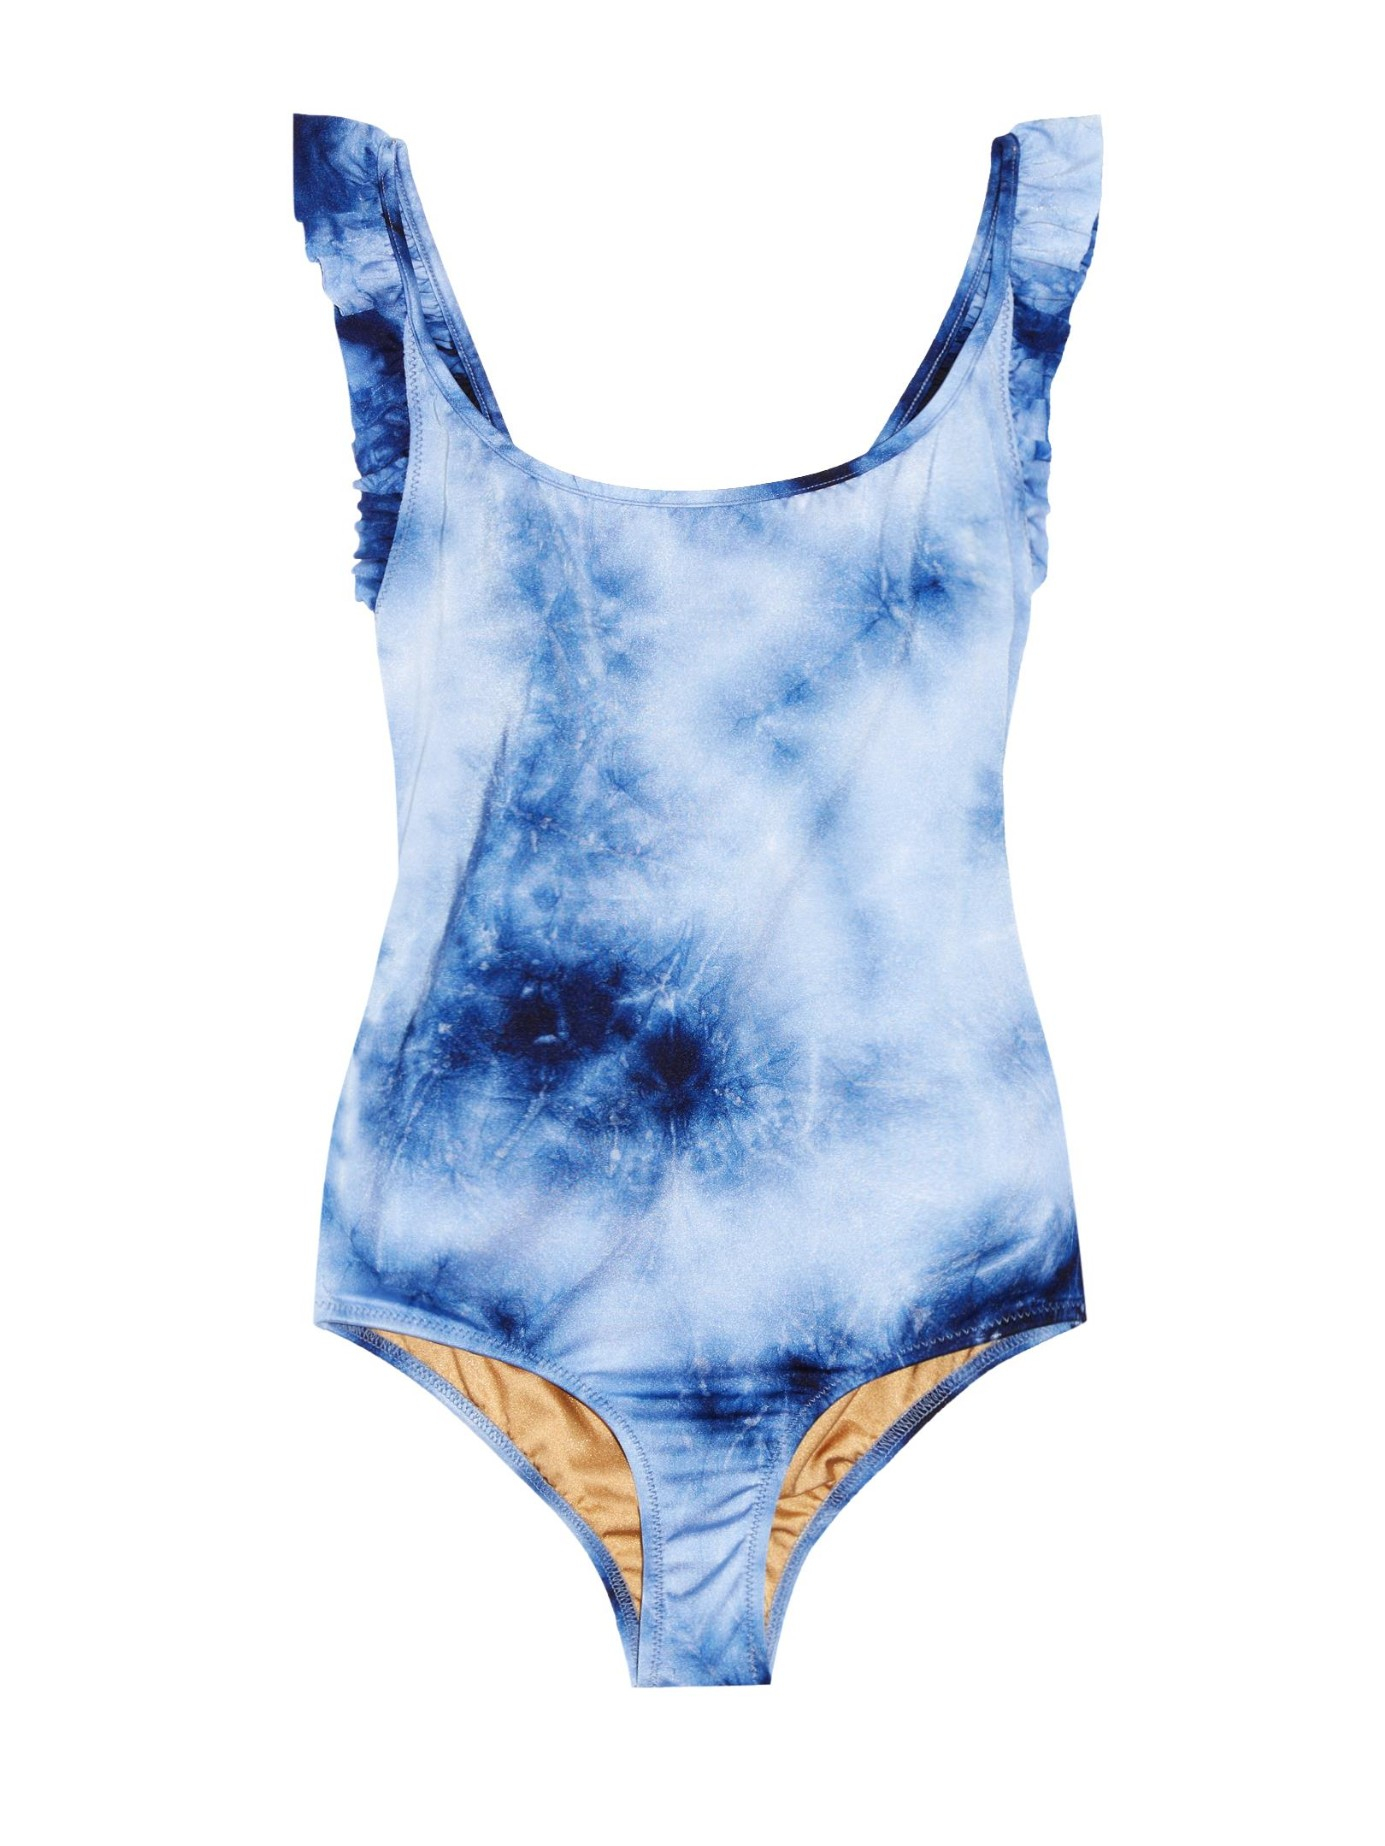 Made by dawn Petal 2 Tie-Dyed Swimsuit | Lyst